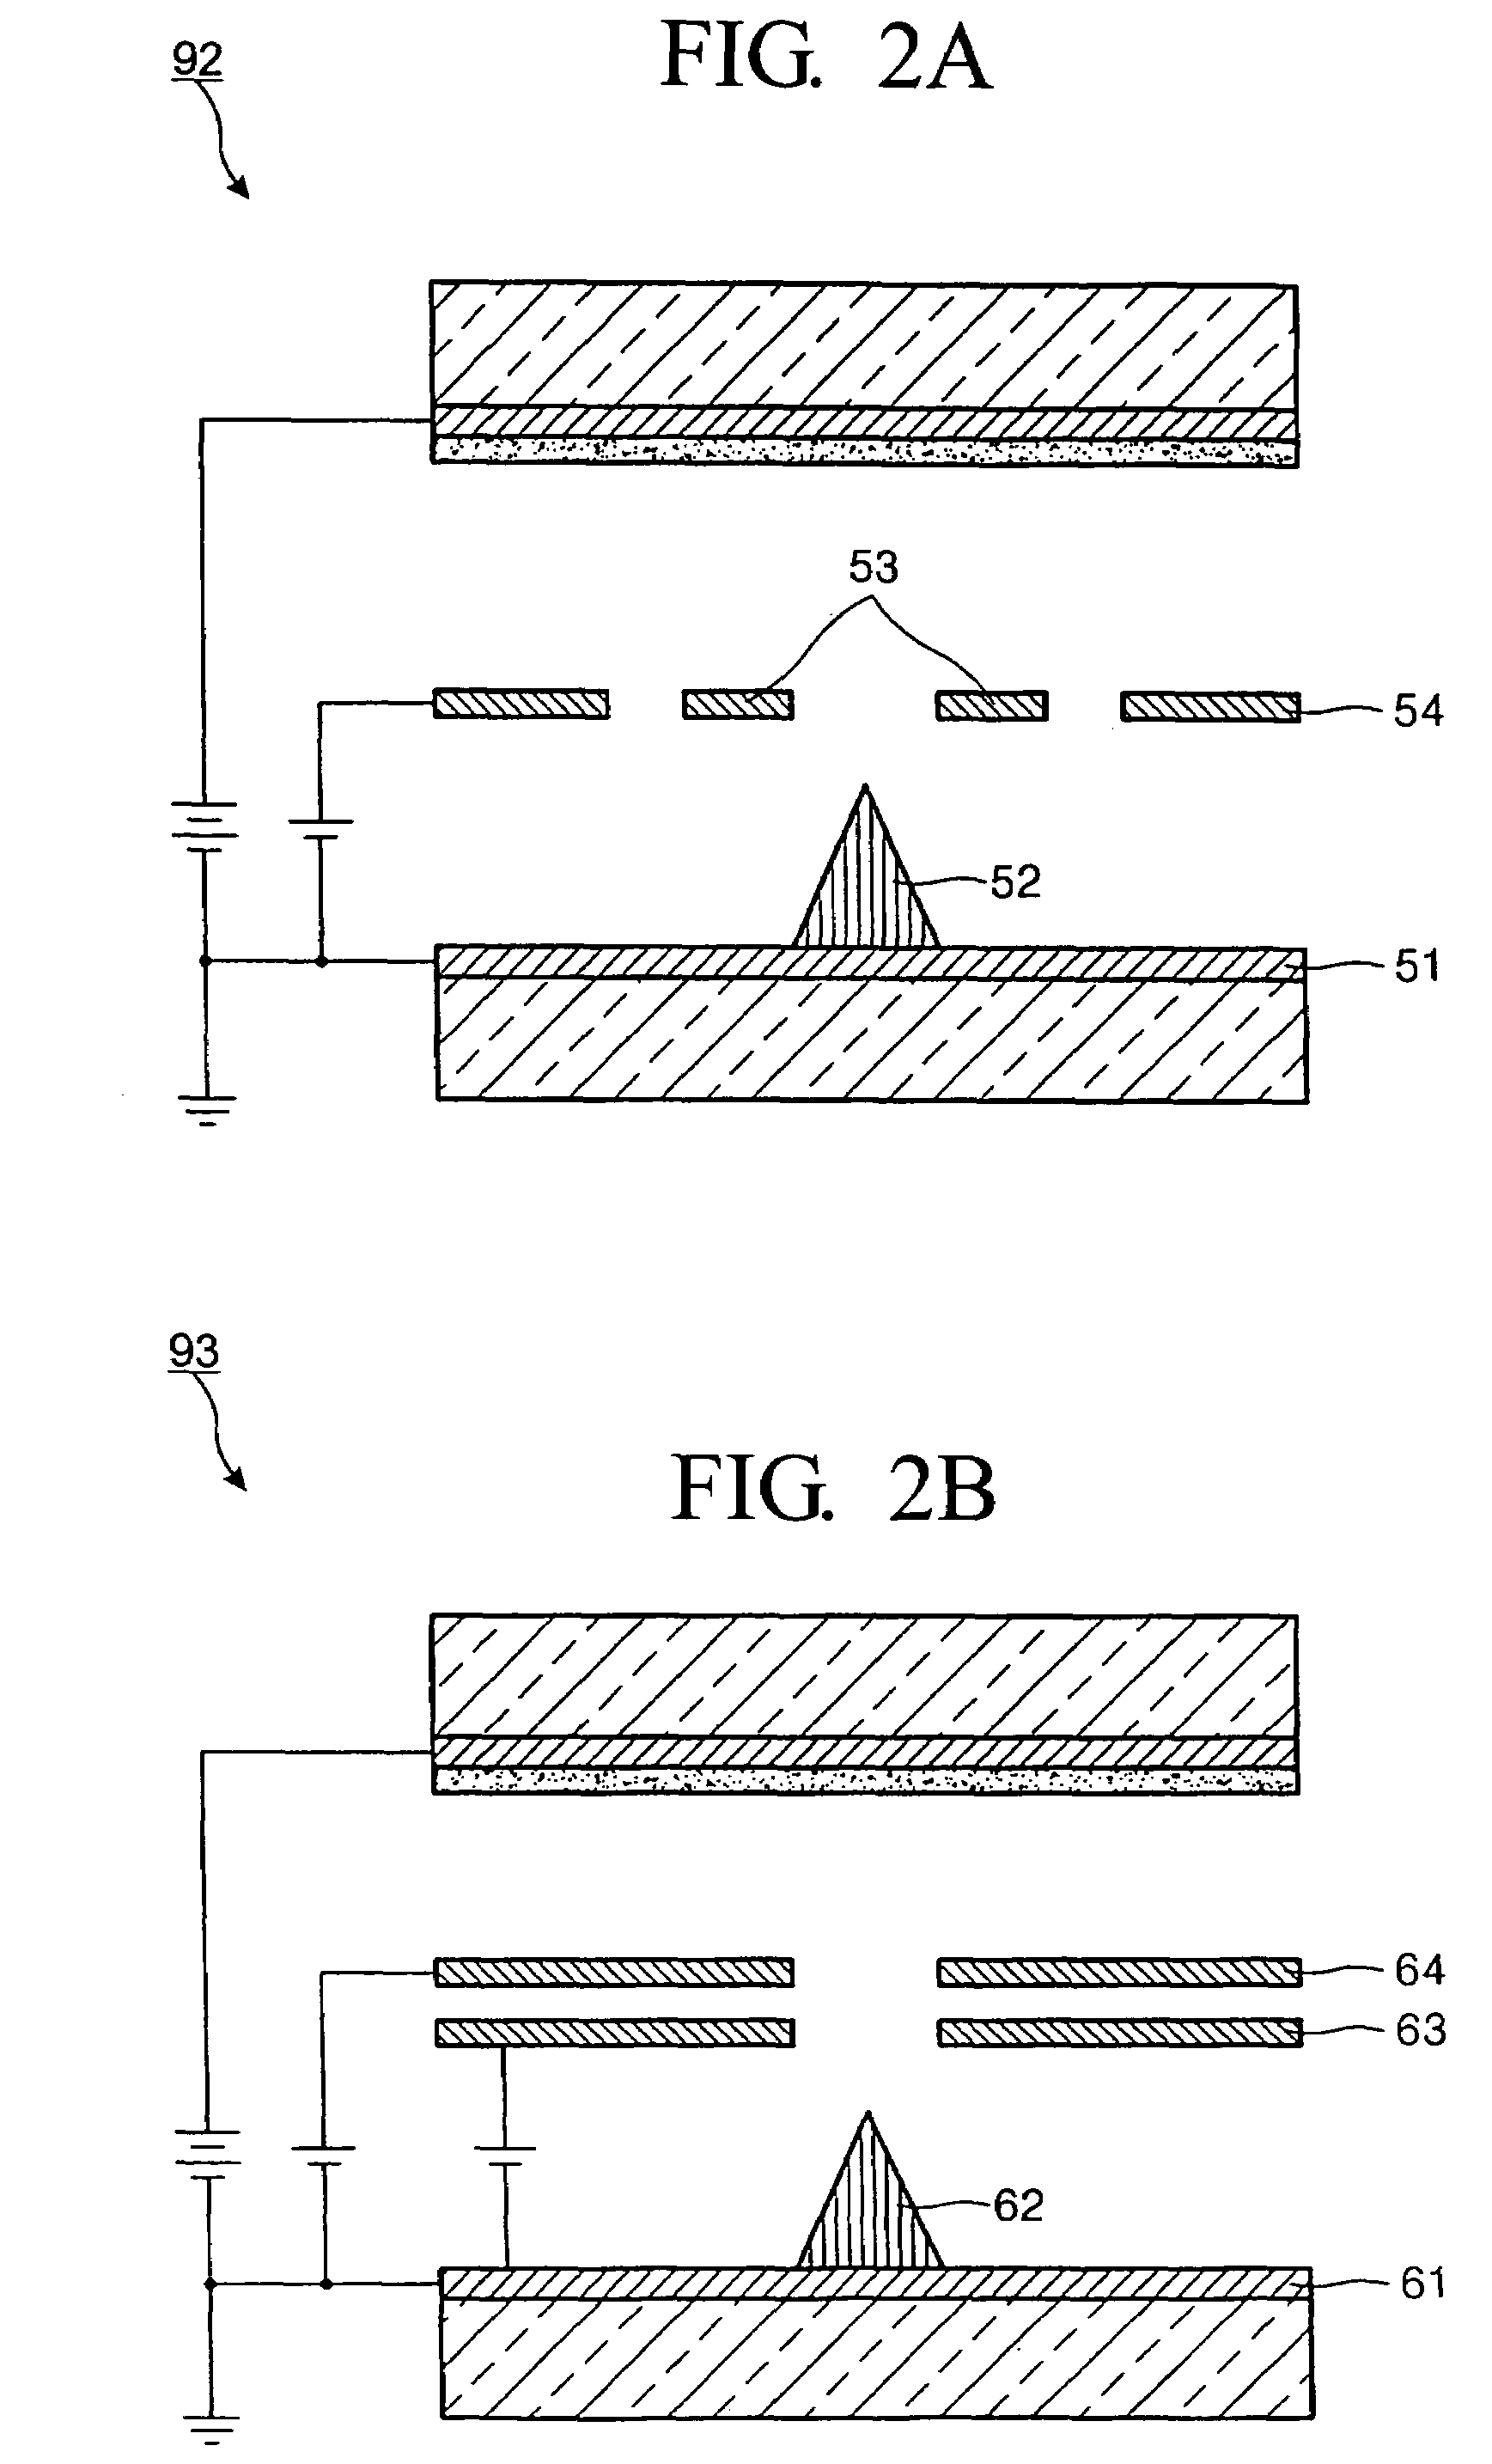 Field emission display having an improved emitter structure